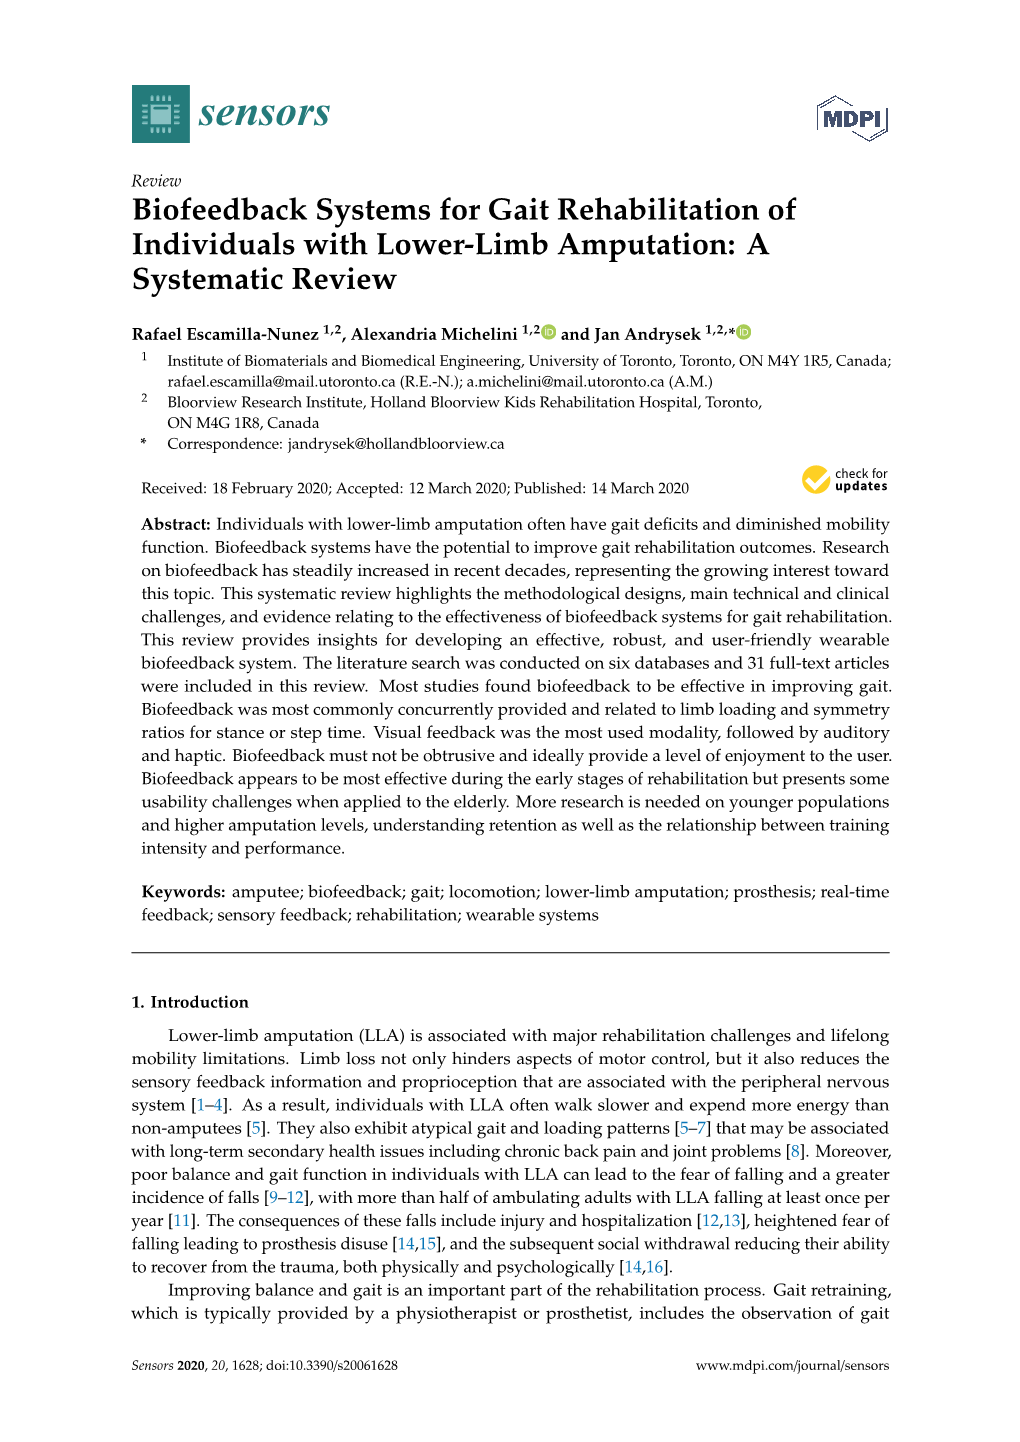 Biofeedback Systems for Gait Rehabilitation of Individuals with Lower-Limb Amputation: a Systematic Review